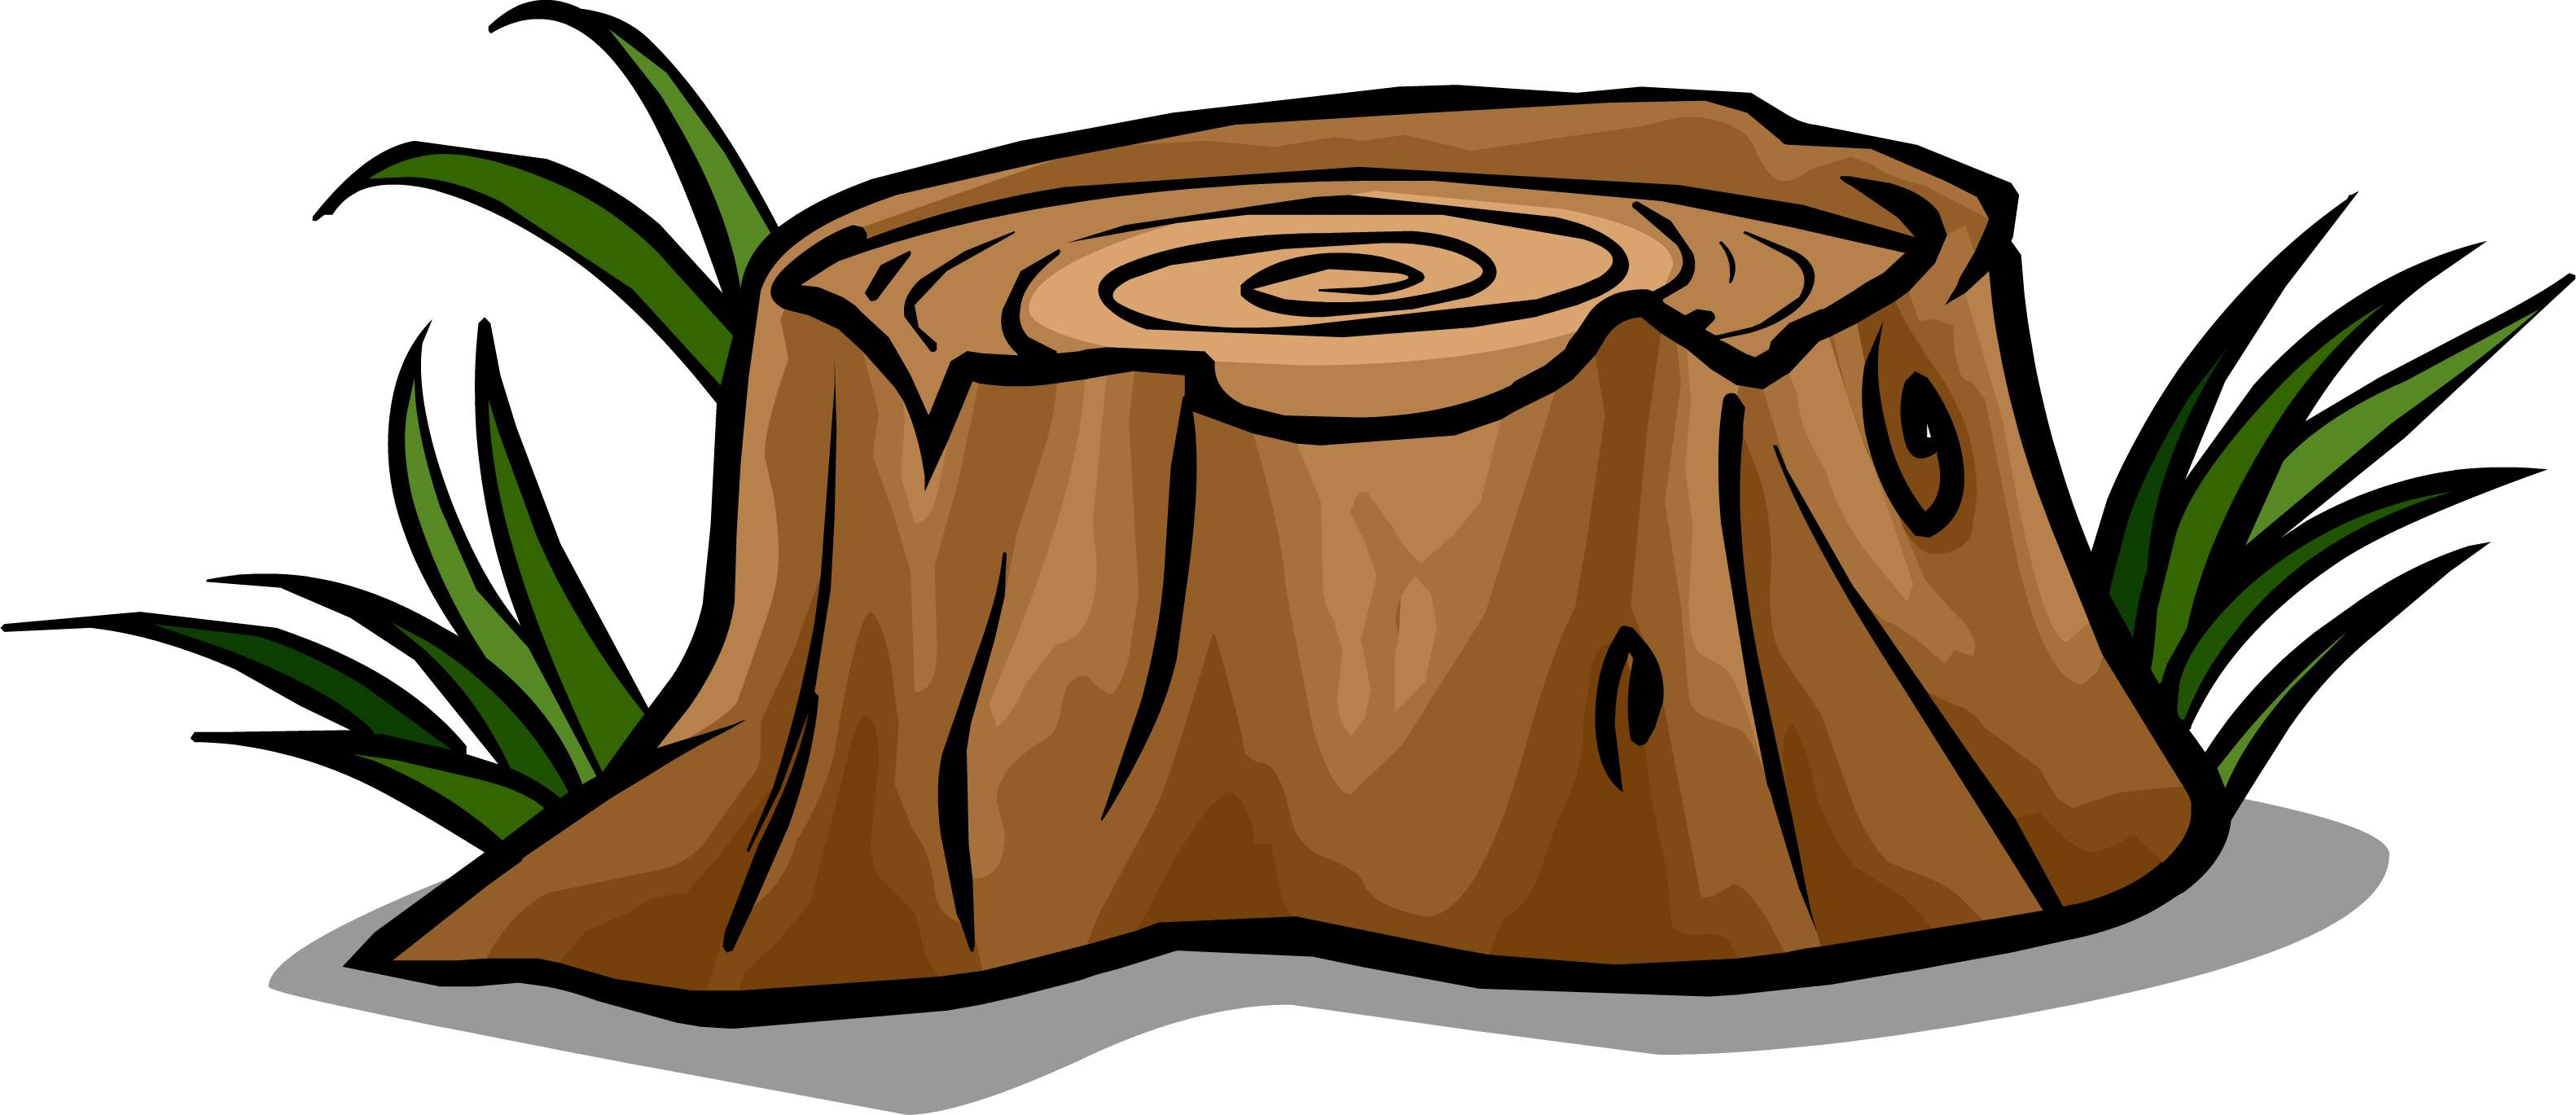 Free Tree Stump Cliparts, Download Free Tree Stump Cliparts png images ...